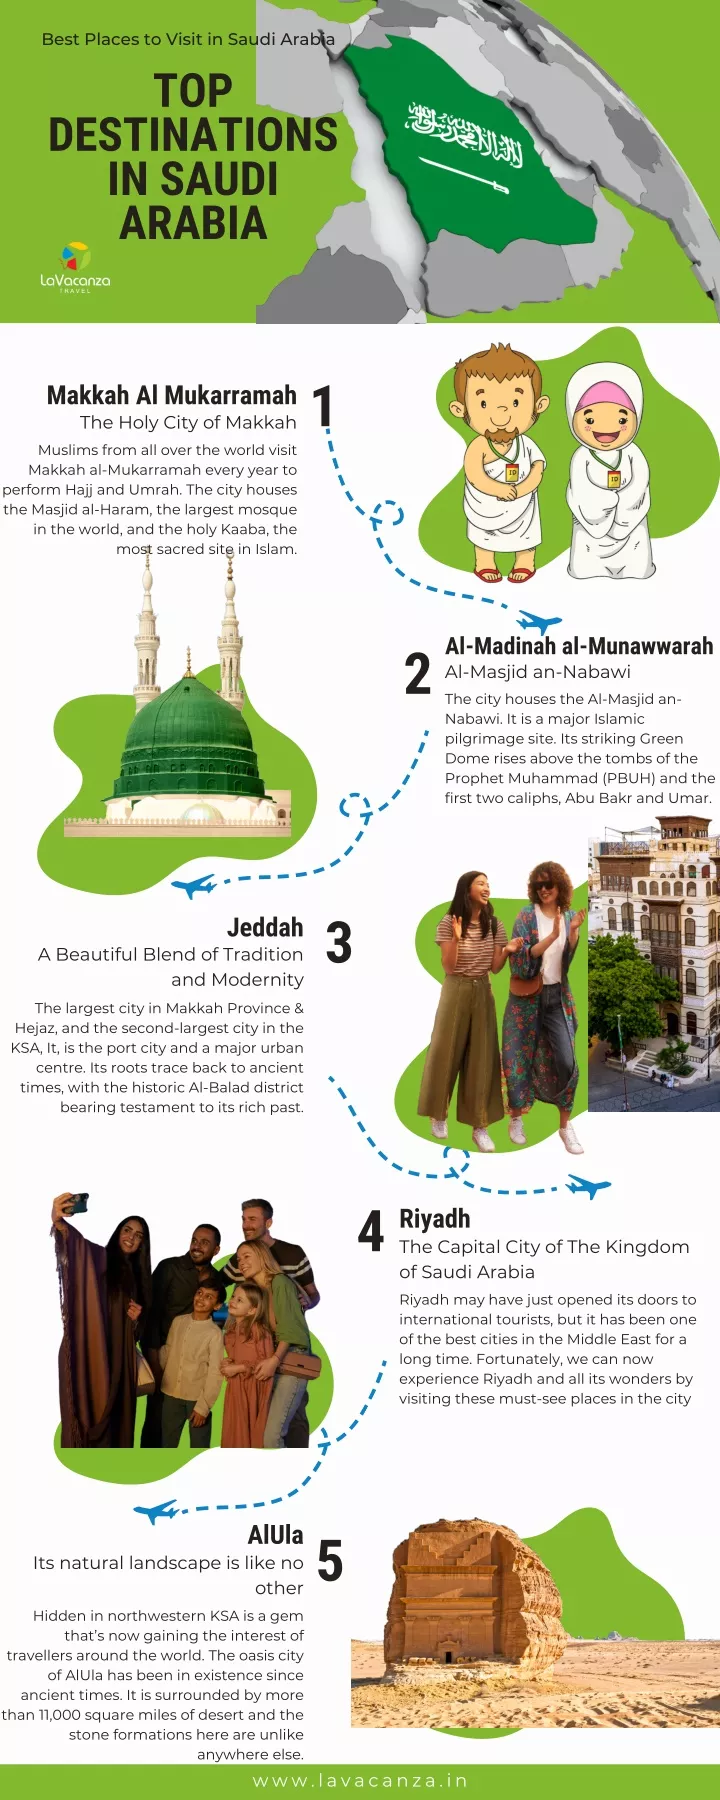 best places to visit in saudi arabia